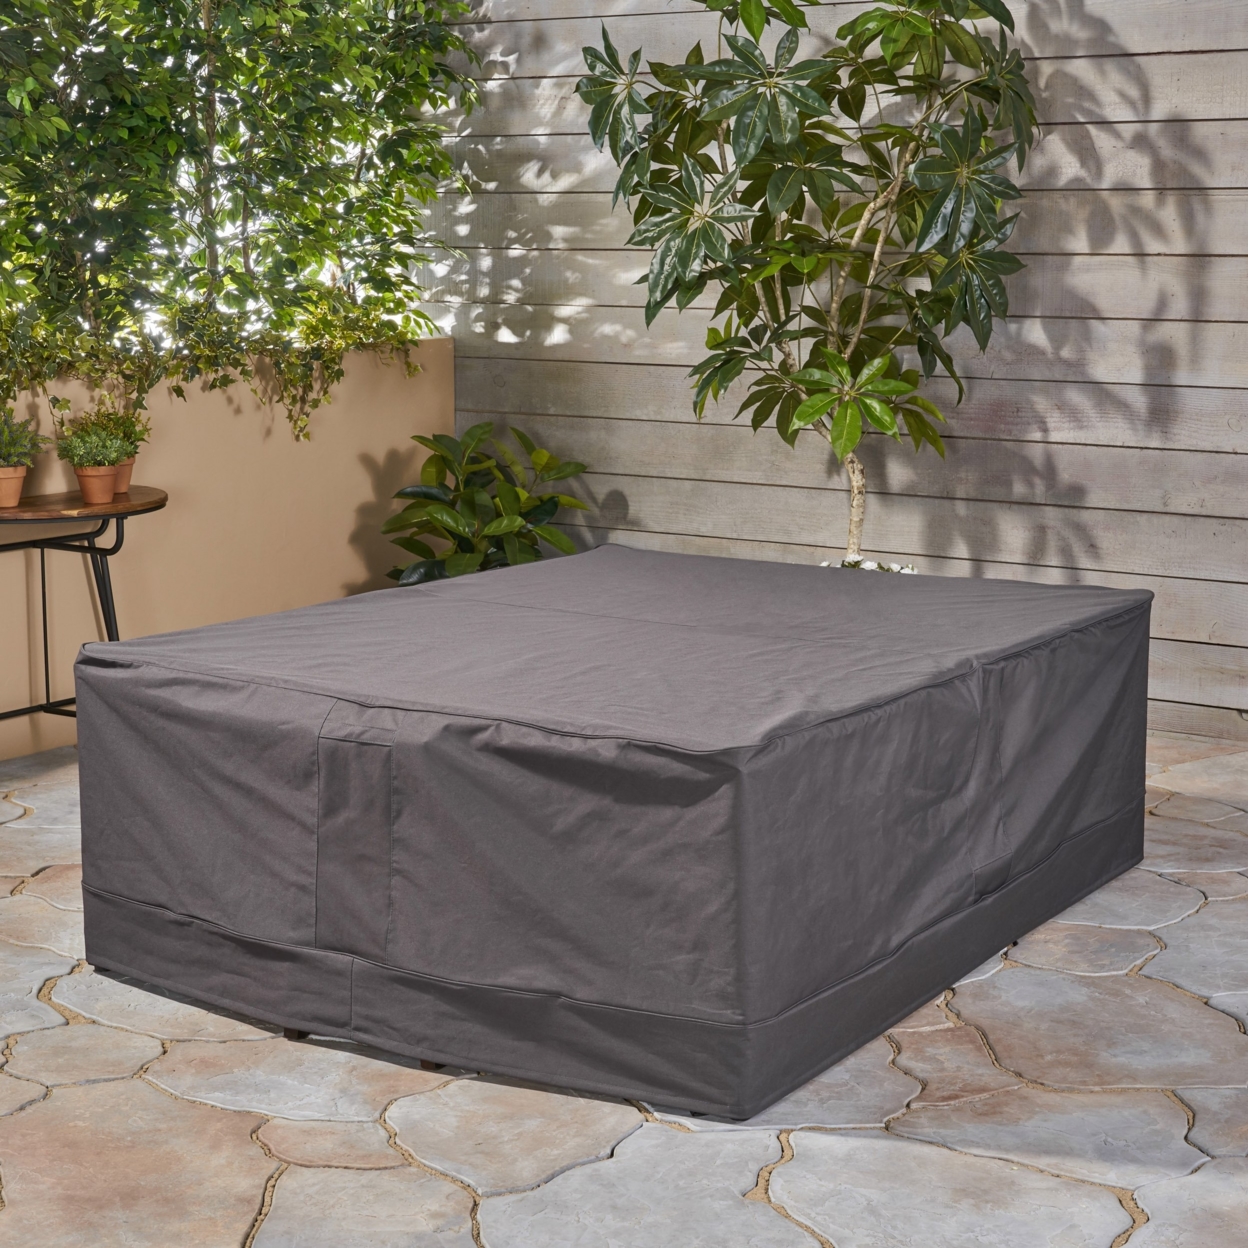 Charlene Outdoor Waterproof Chat Set Cover, Gray